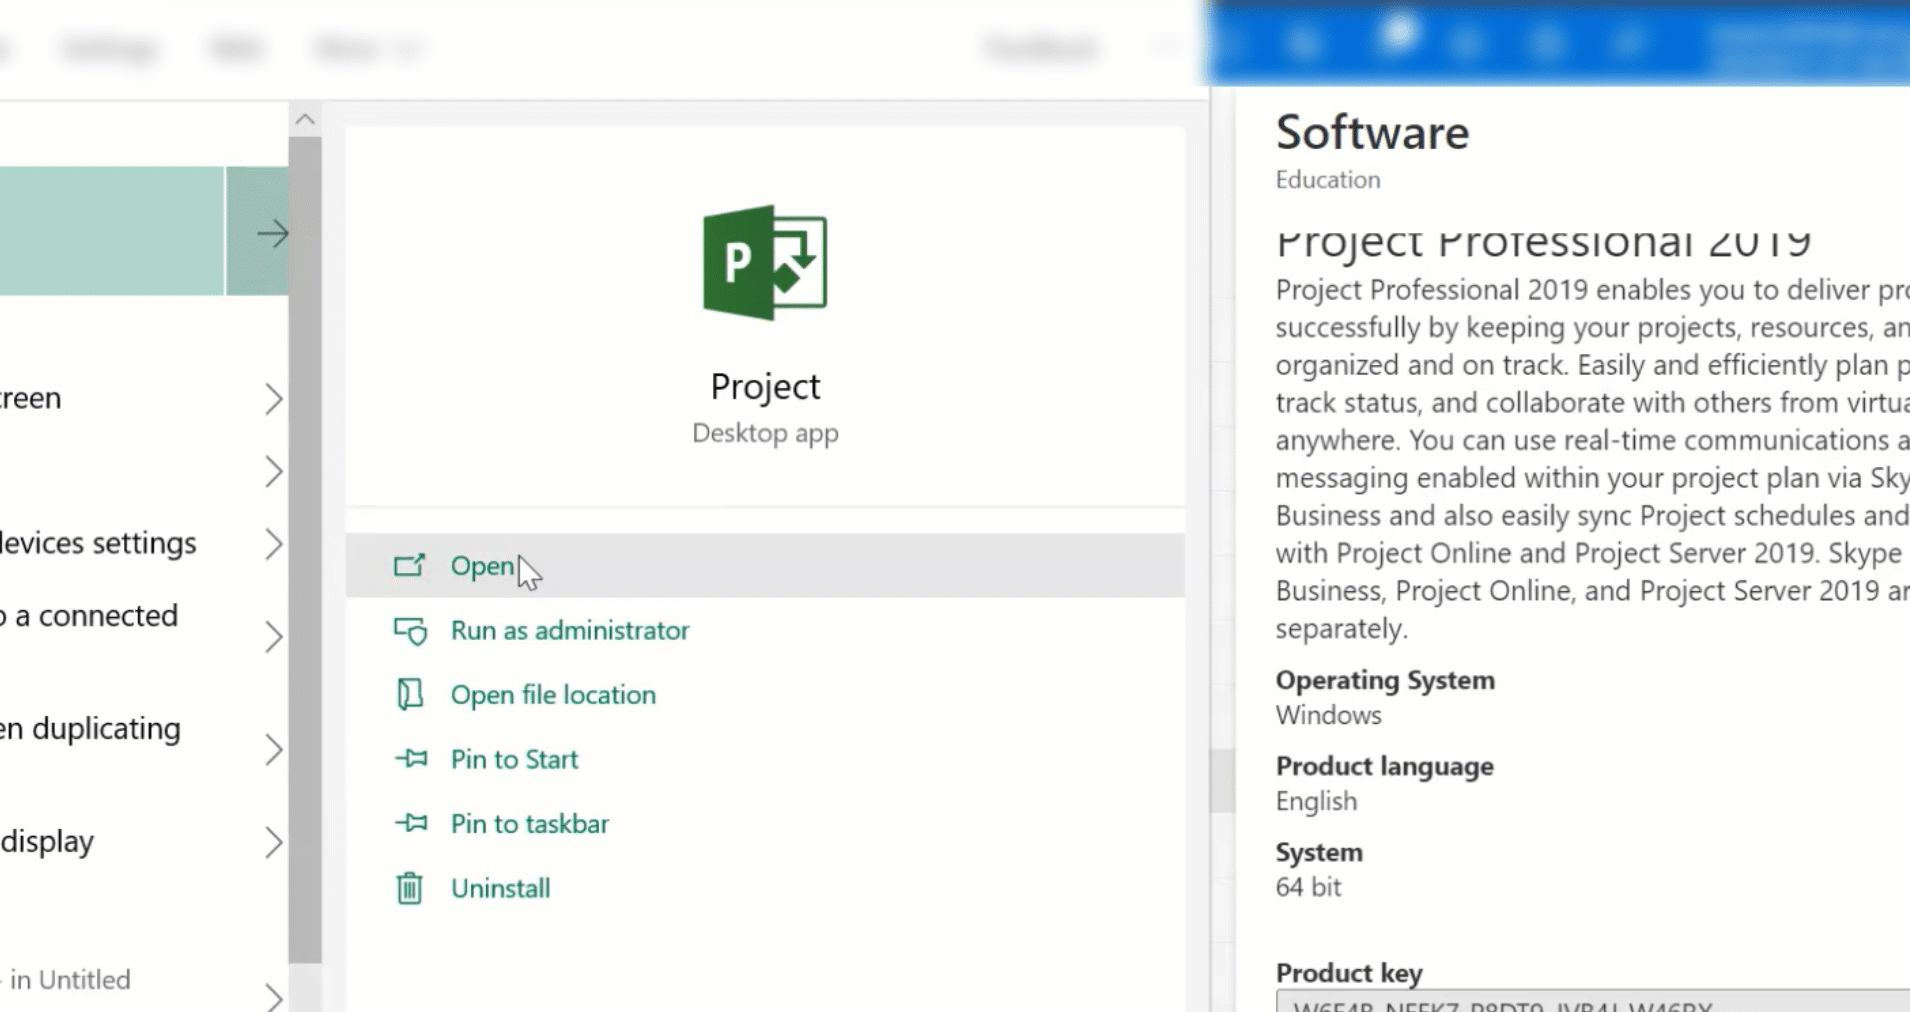 Image of Project Professional application